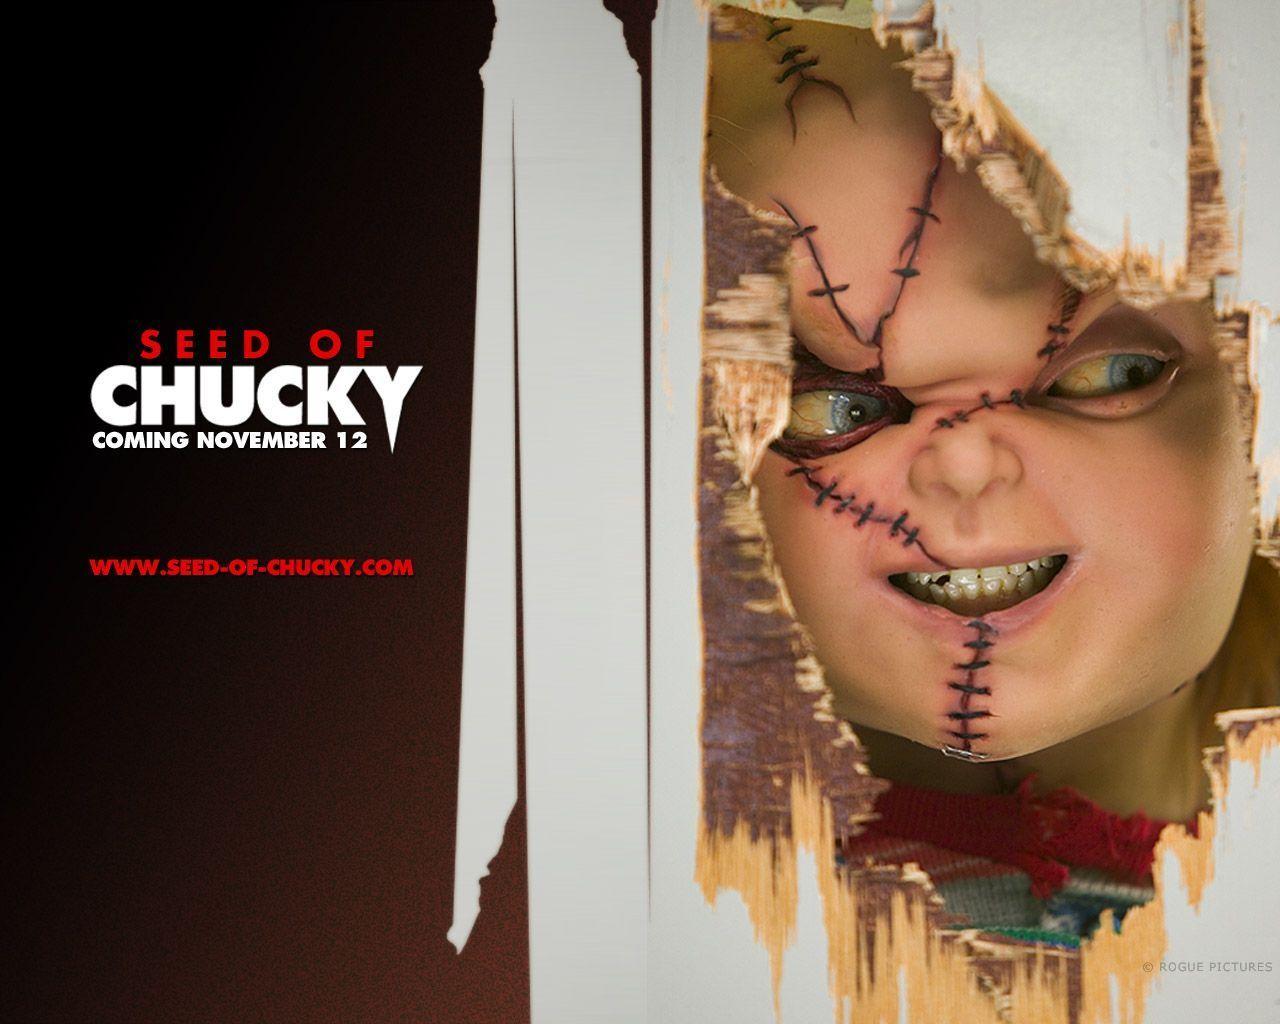 bride of chucky soundtrack free download